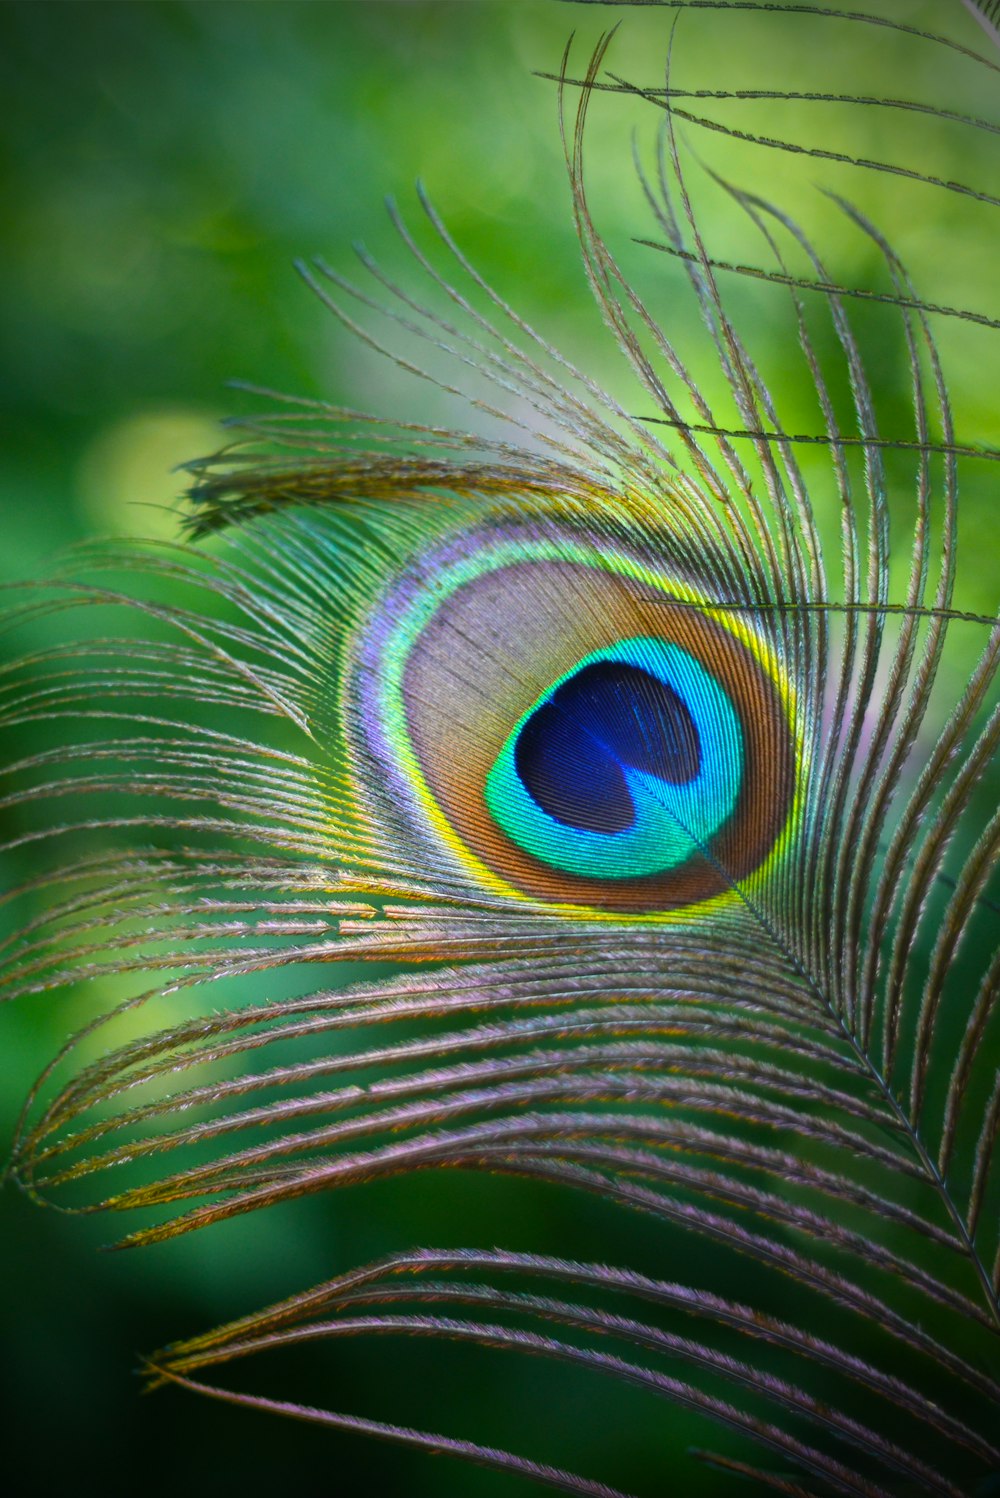 Wallpapers of peacock feathers hd